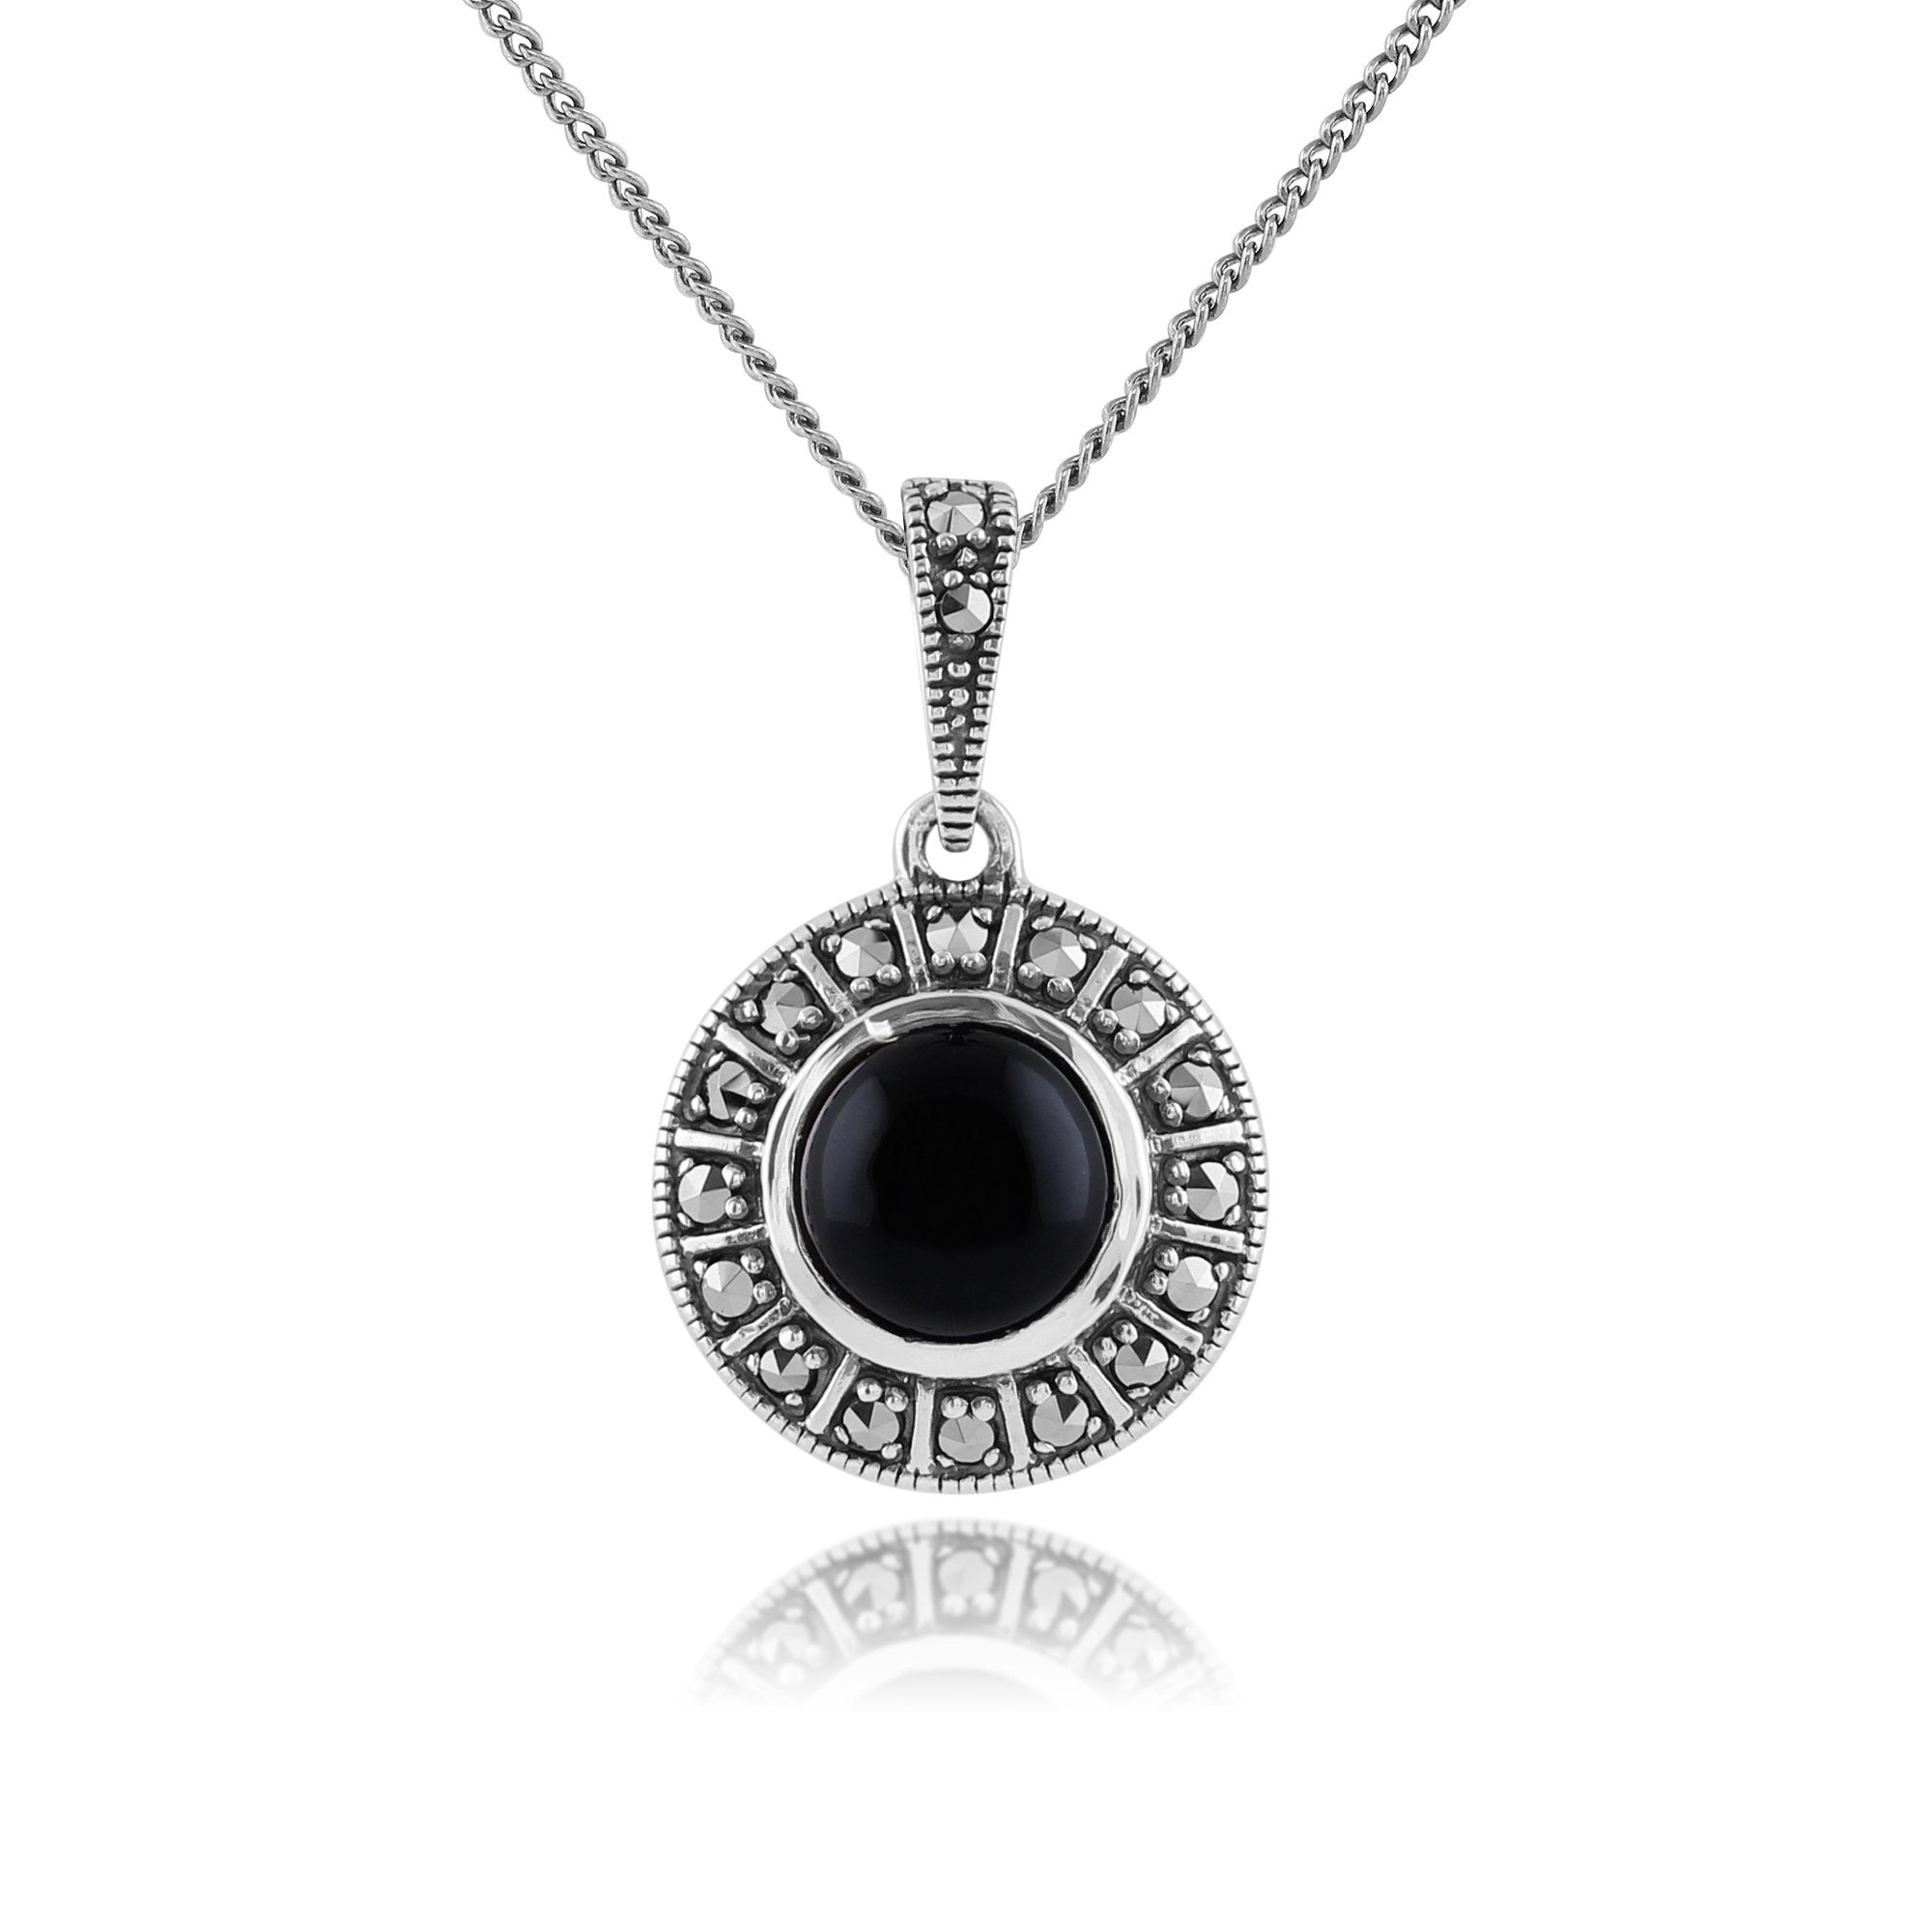 Art Deco Style Round Black Onyx Cabochon & Marcasite Pendant In Sterling Silver